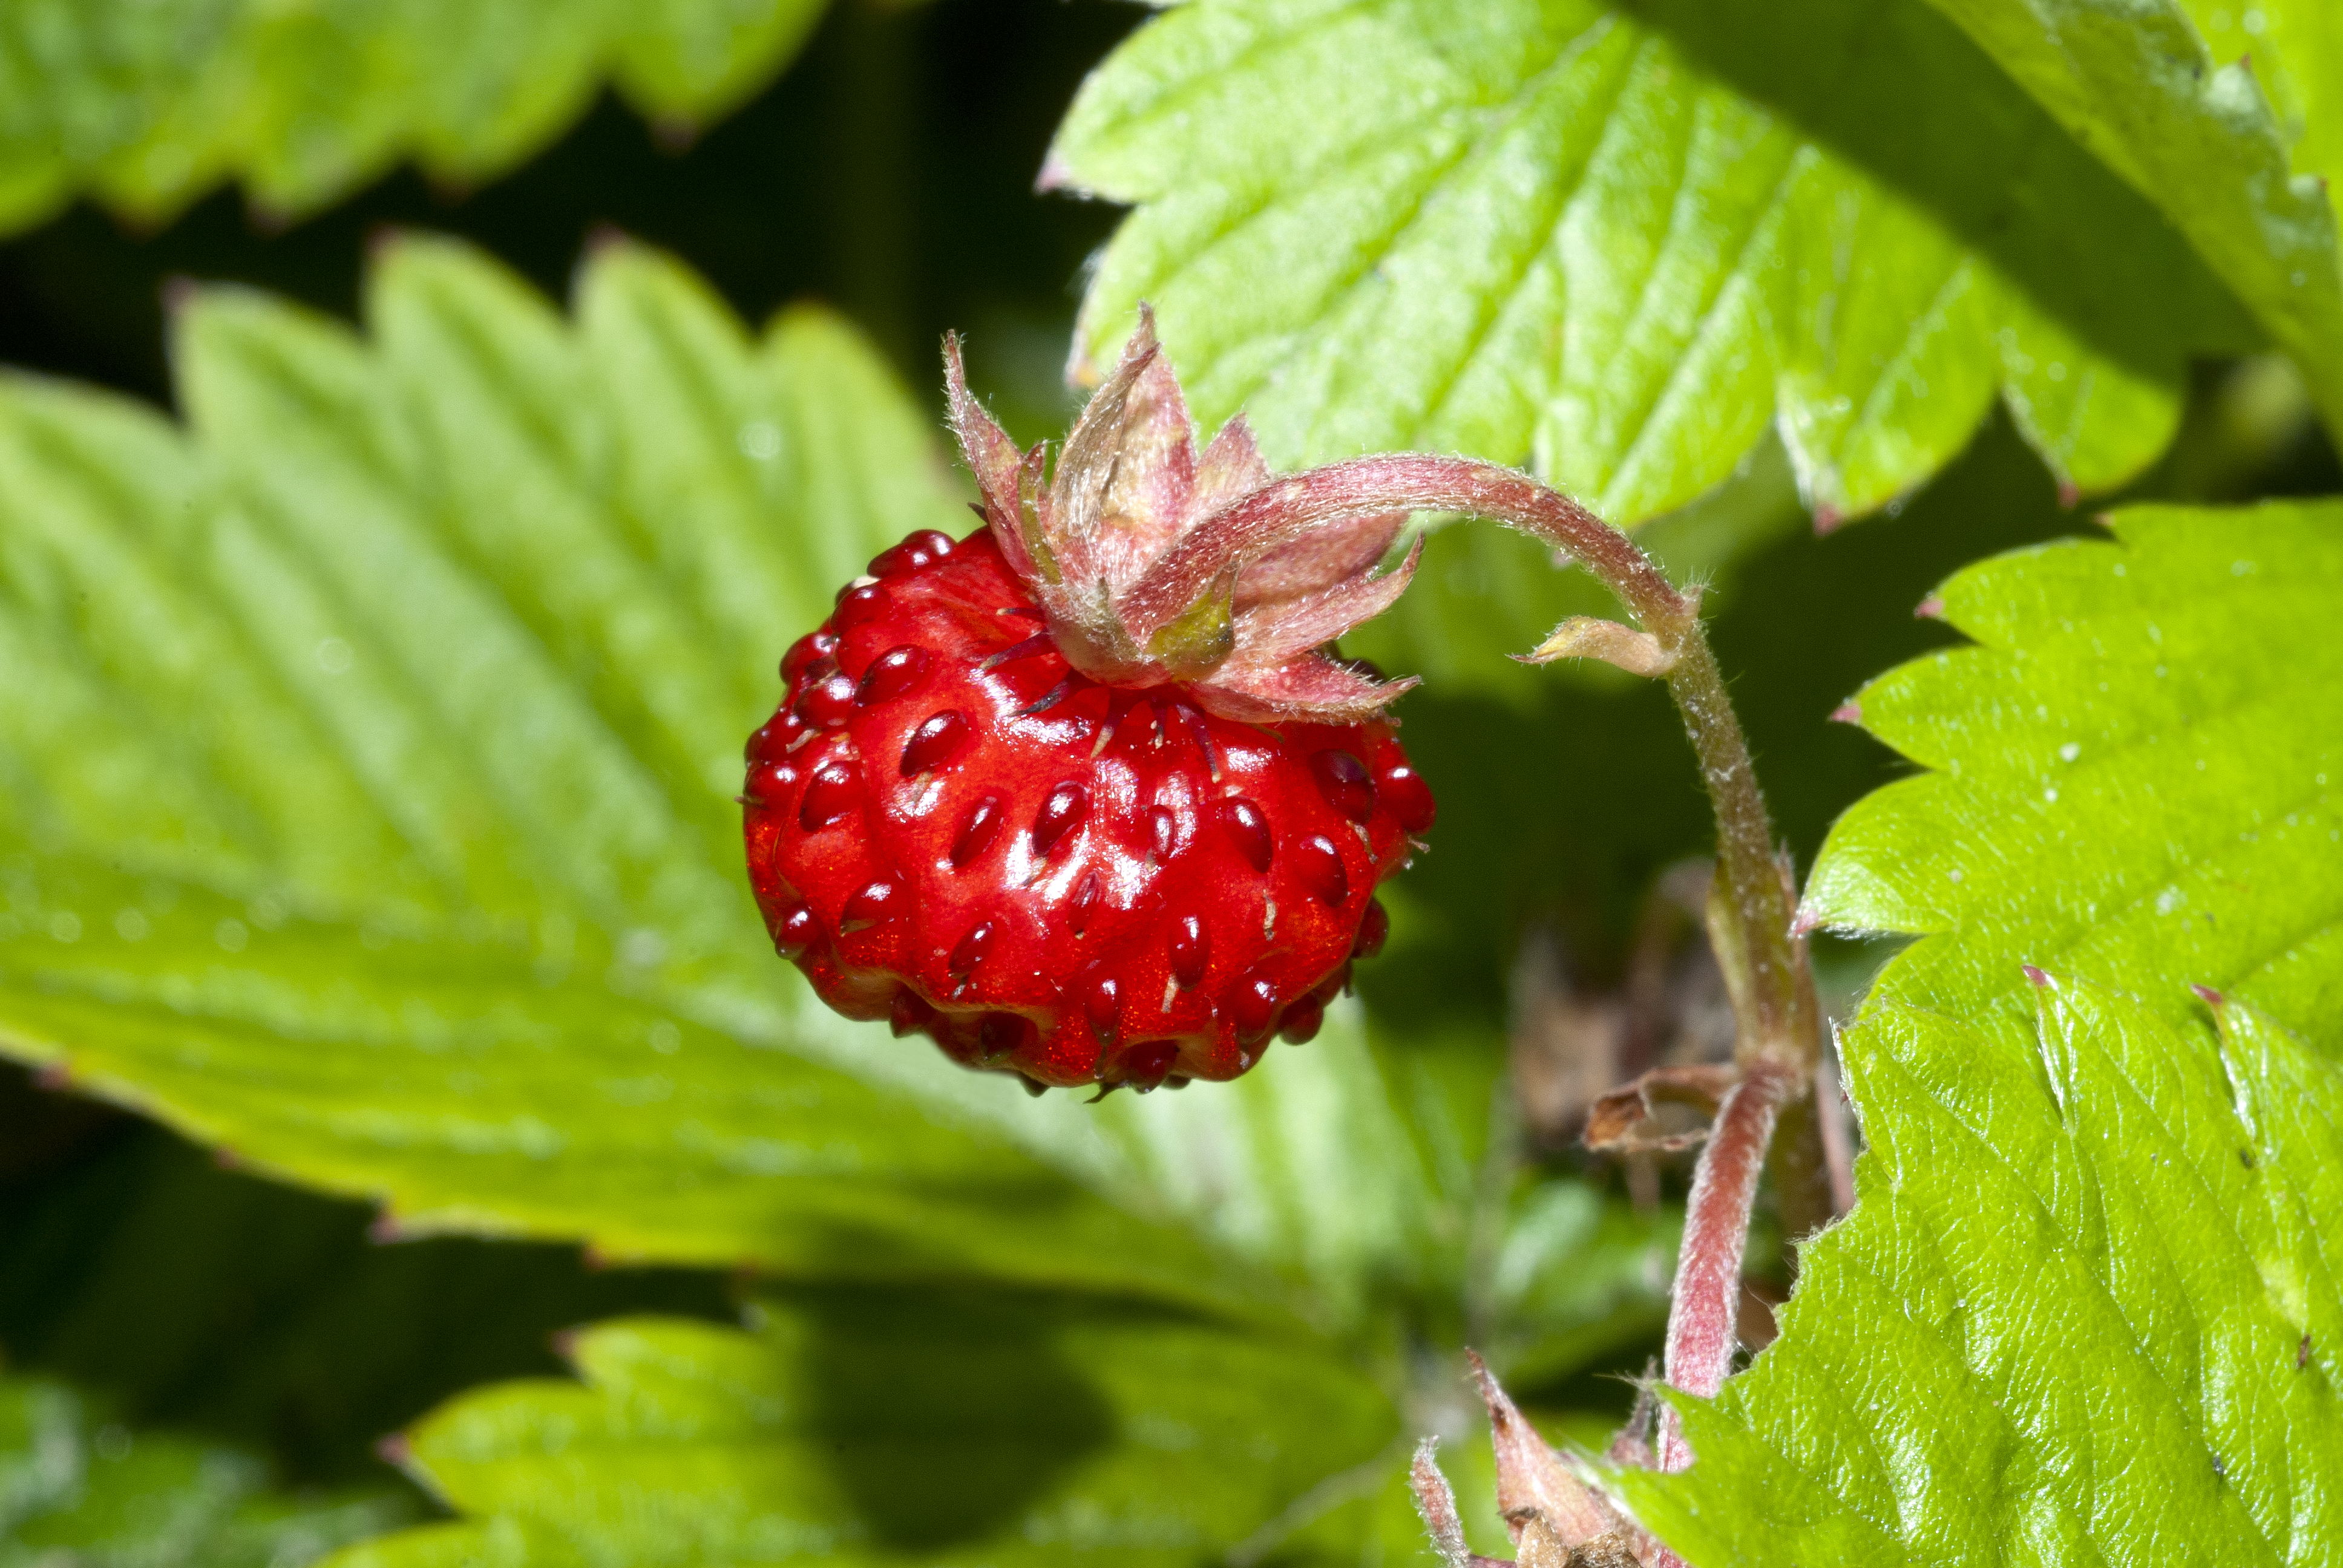 Miniature, red, fleshy 'fruit' of the wild strawberry